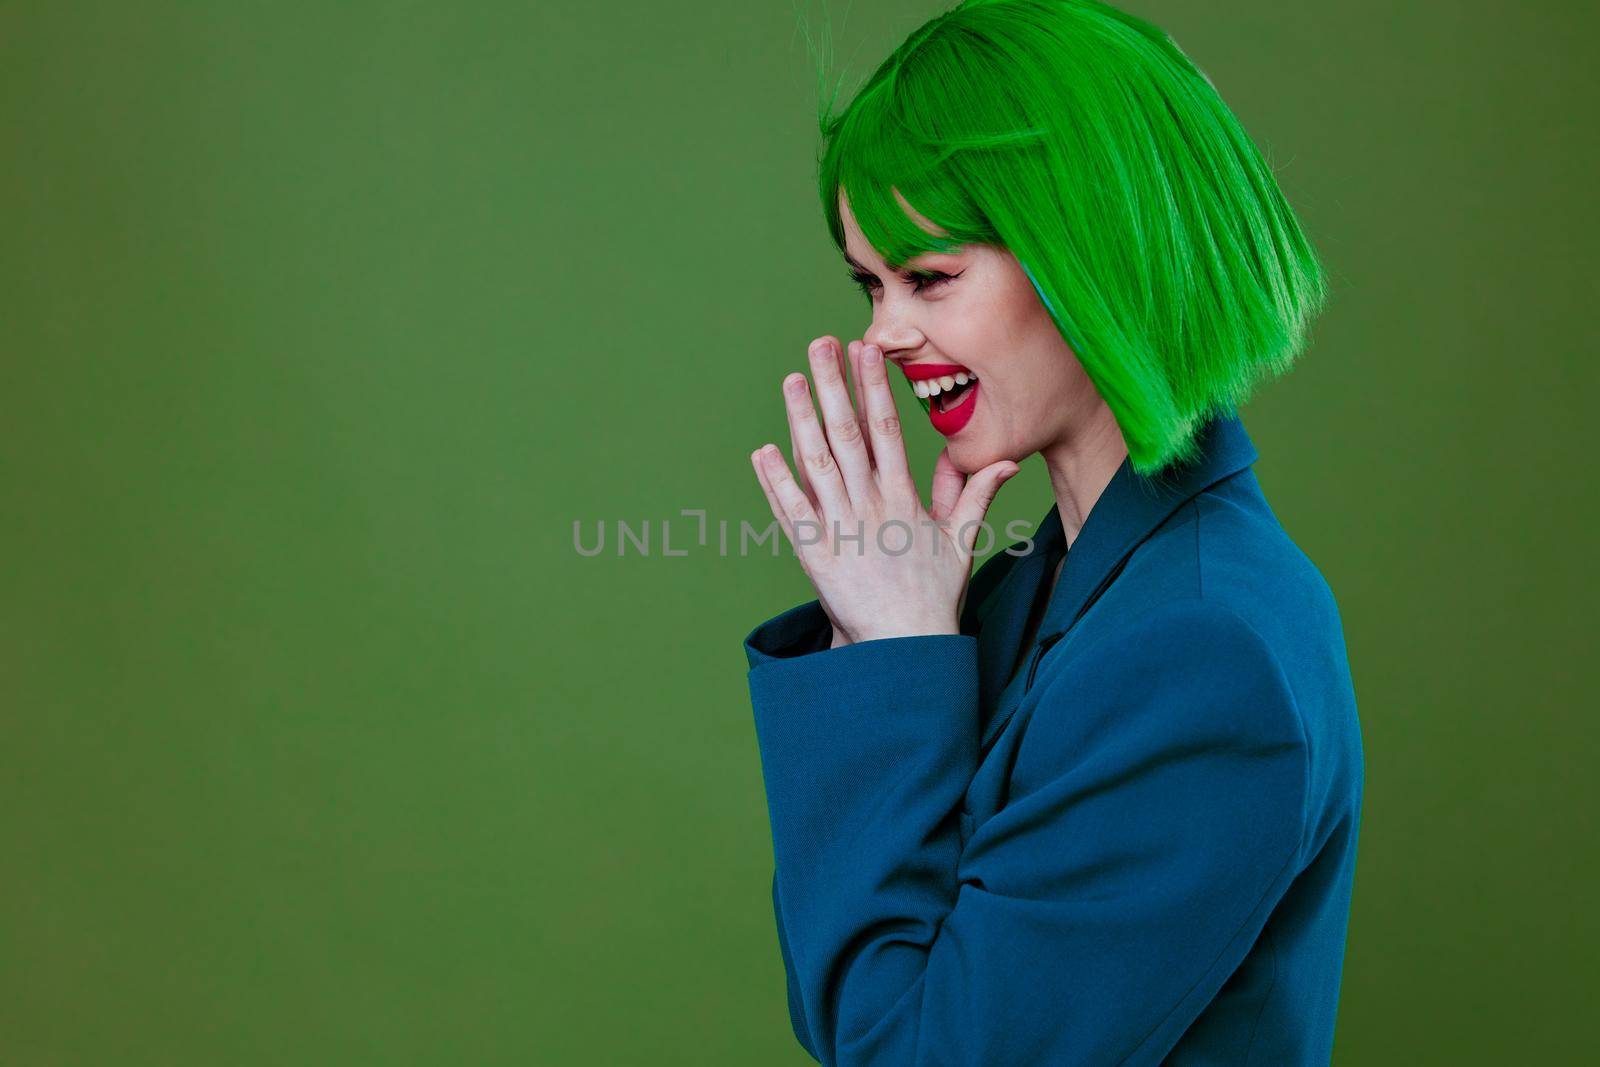 Portrait of a charming lady Glamor green wig red lips blue jacket green background unaltered by SHOTPRIME